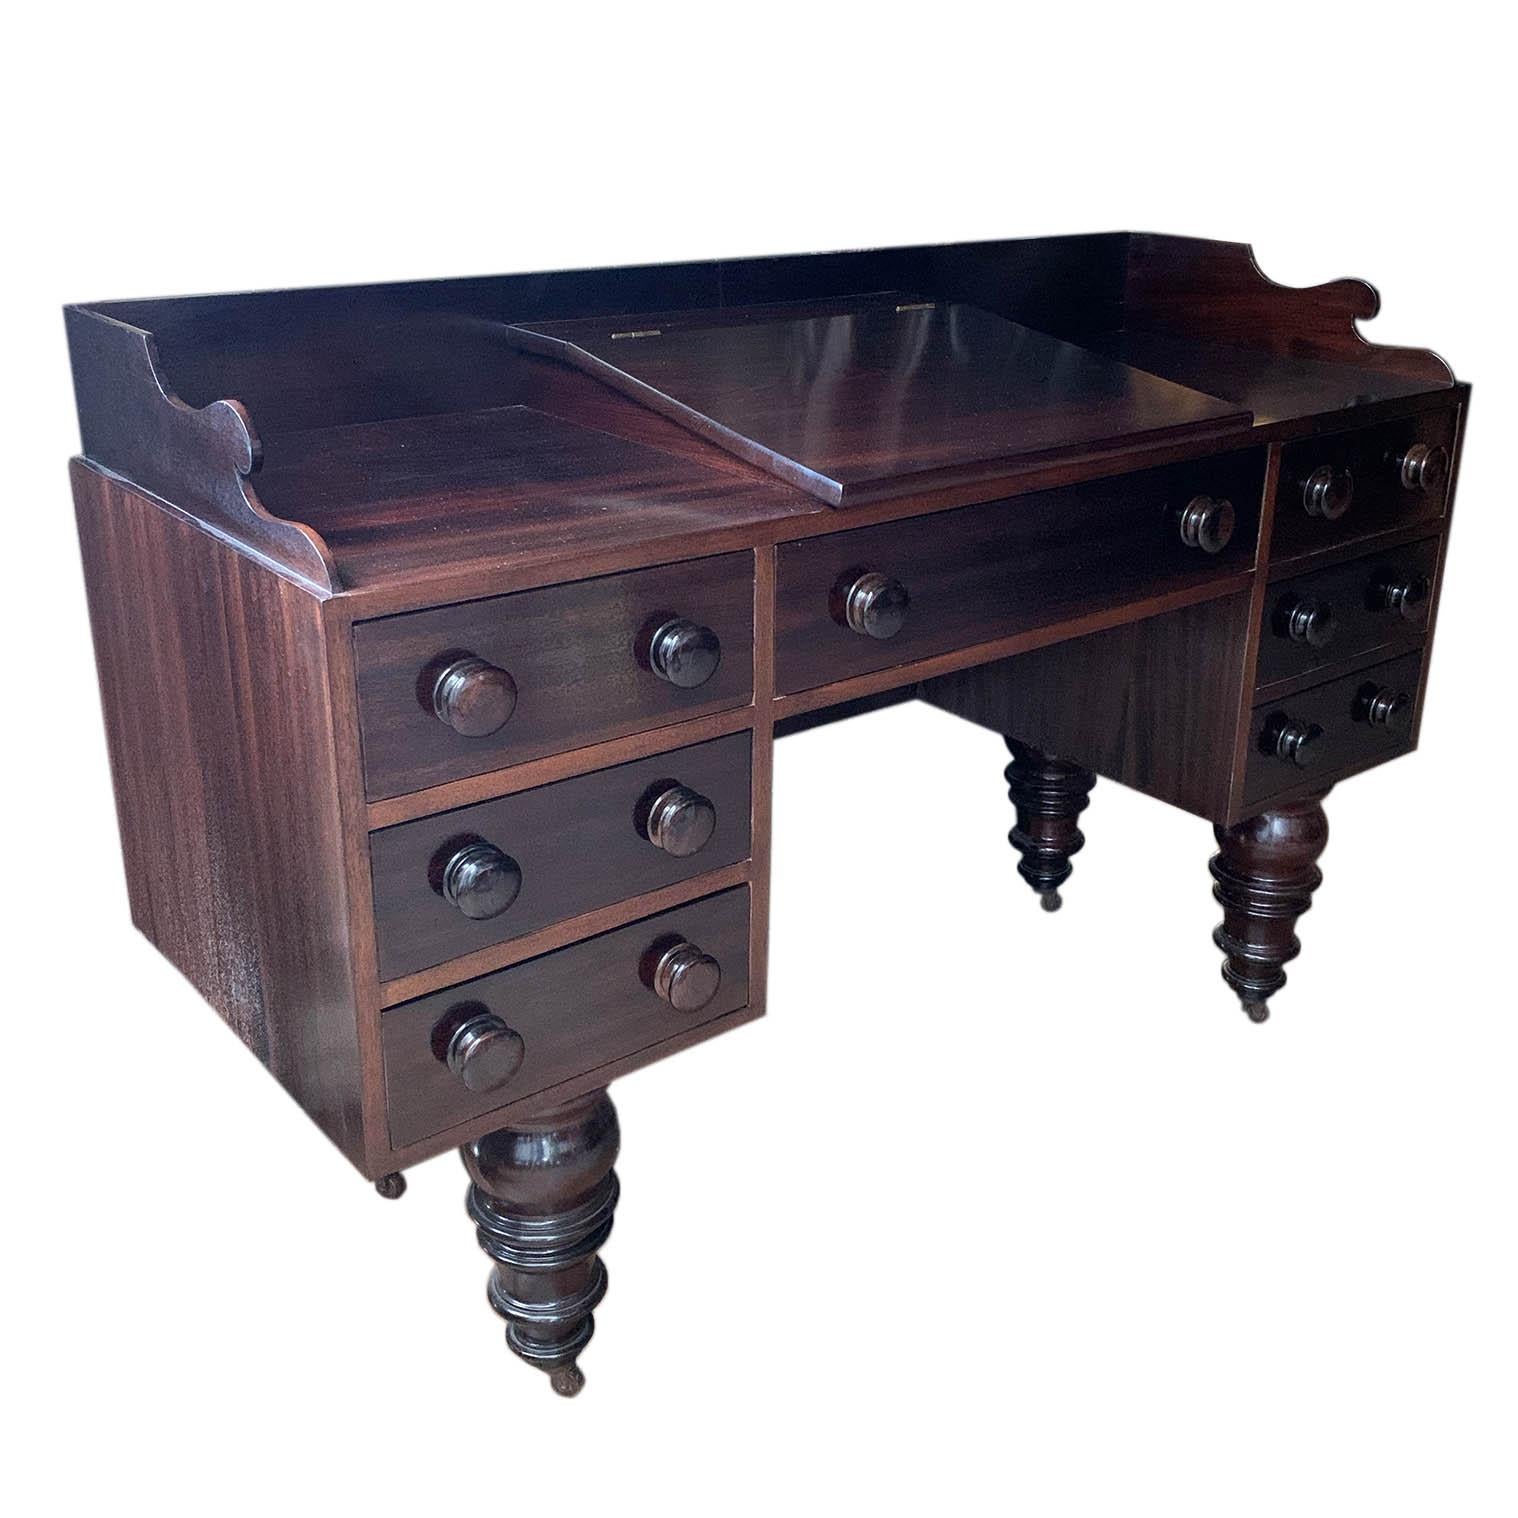 An American writing desk designed to inspire creativity with a chair area measuring at 24 inches in width, 19 inches in depth, and 24 inches in height. The desk offers ample clearance of 13.25 inches.